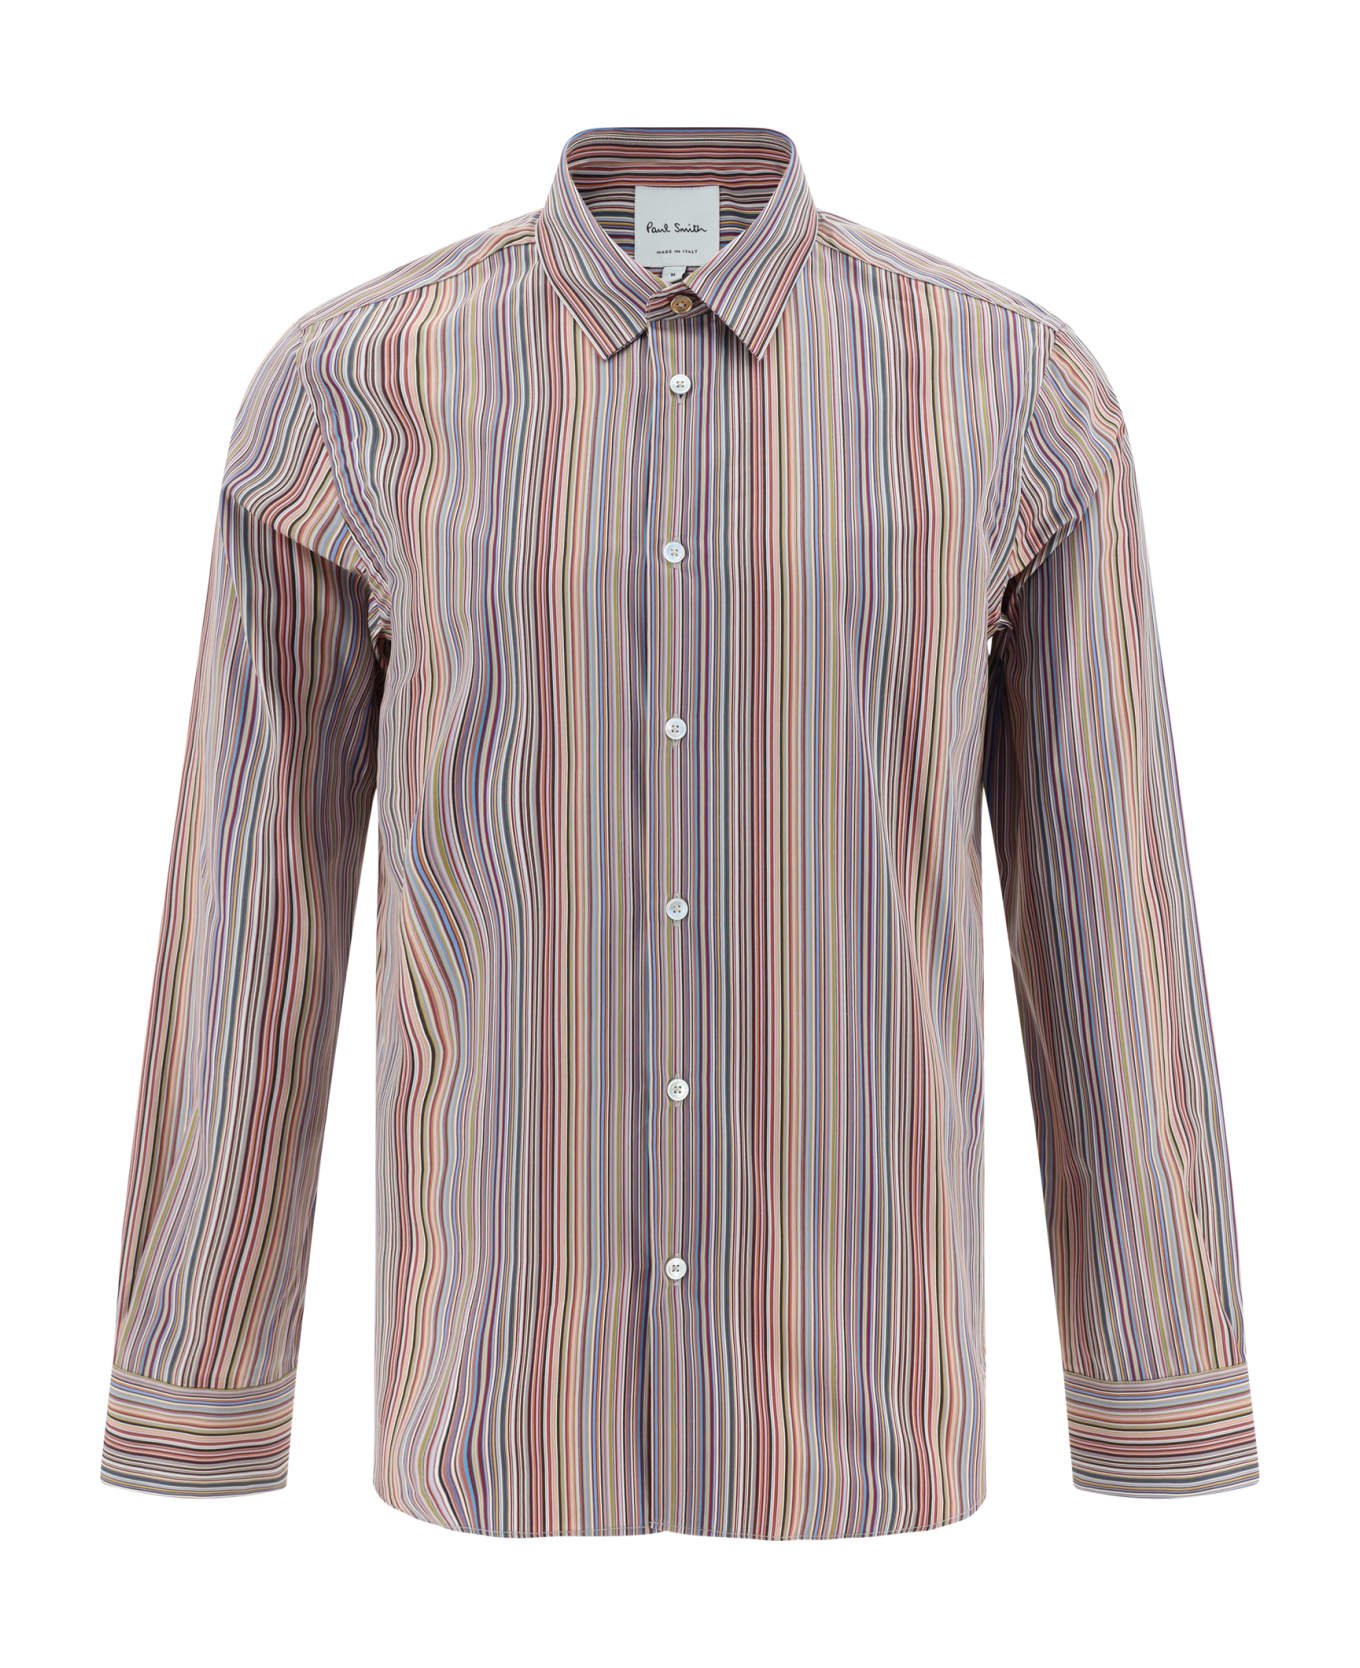 PS by Paul Smith Shirt Shirt - MULTICOLOR